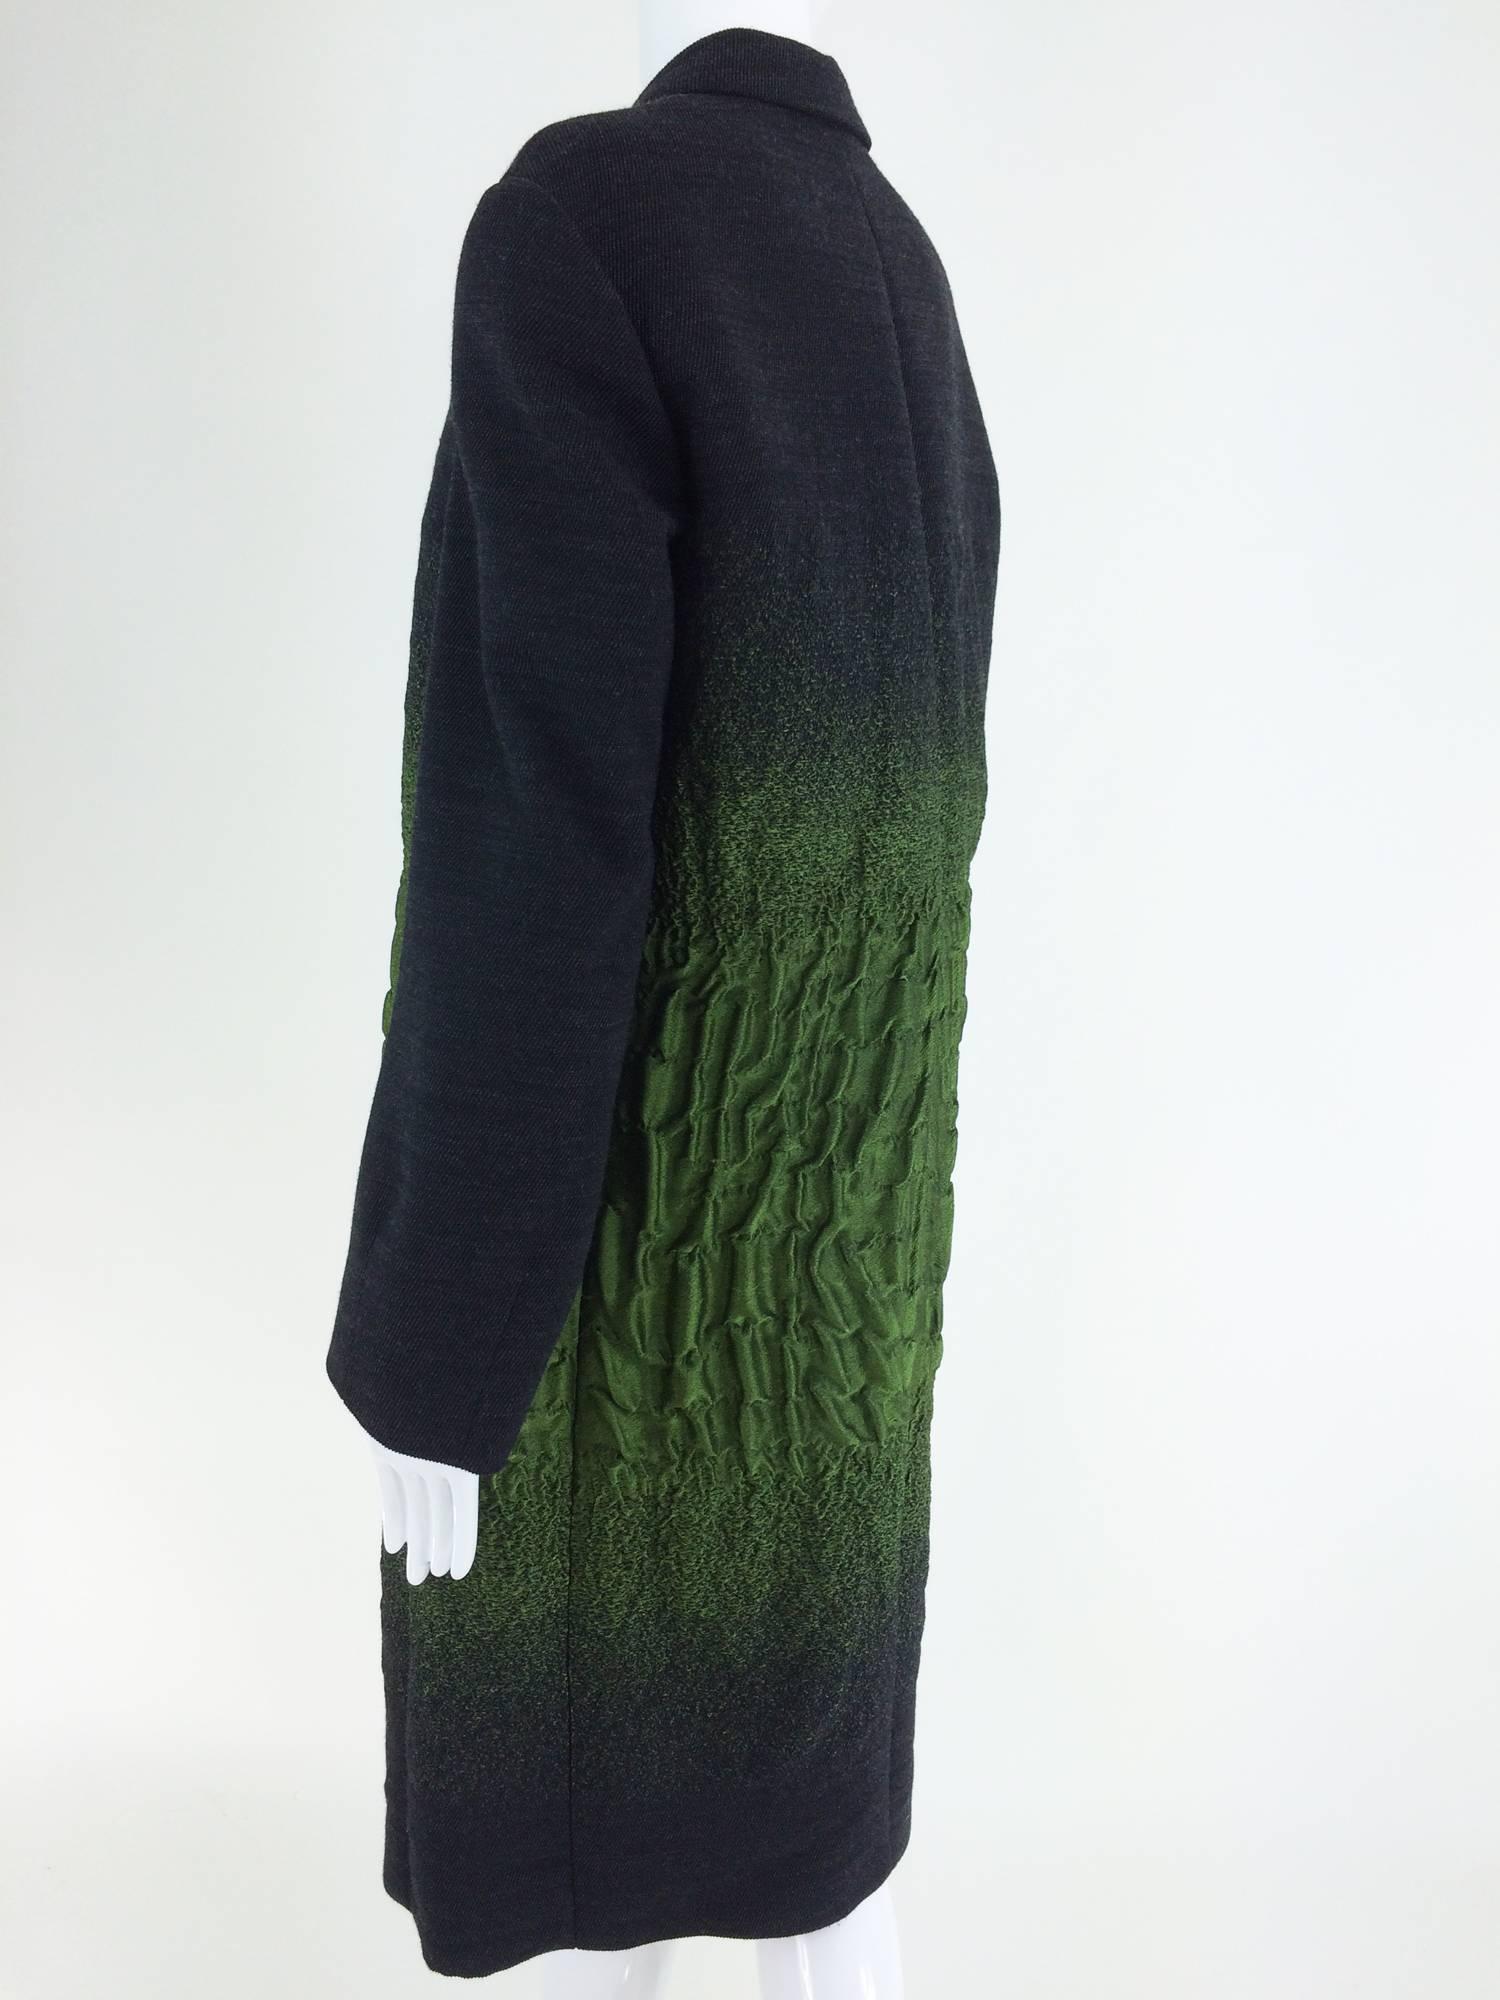 Prada A/W 2007 runway look #19 green/gray textured wool coat  In Excellent Condition In West Palm Beach, FL